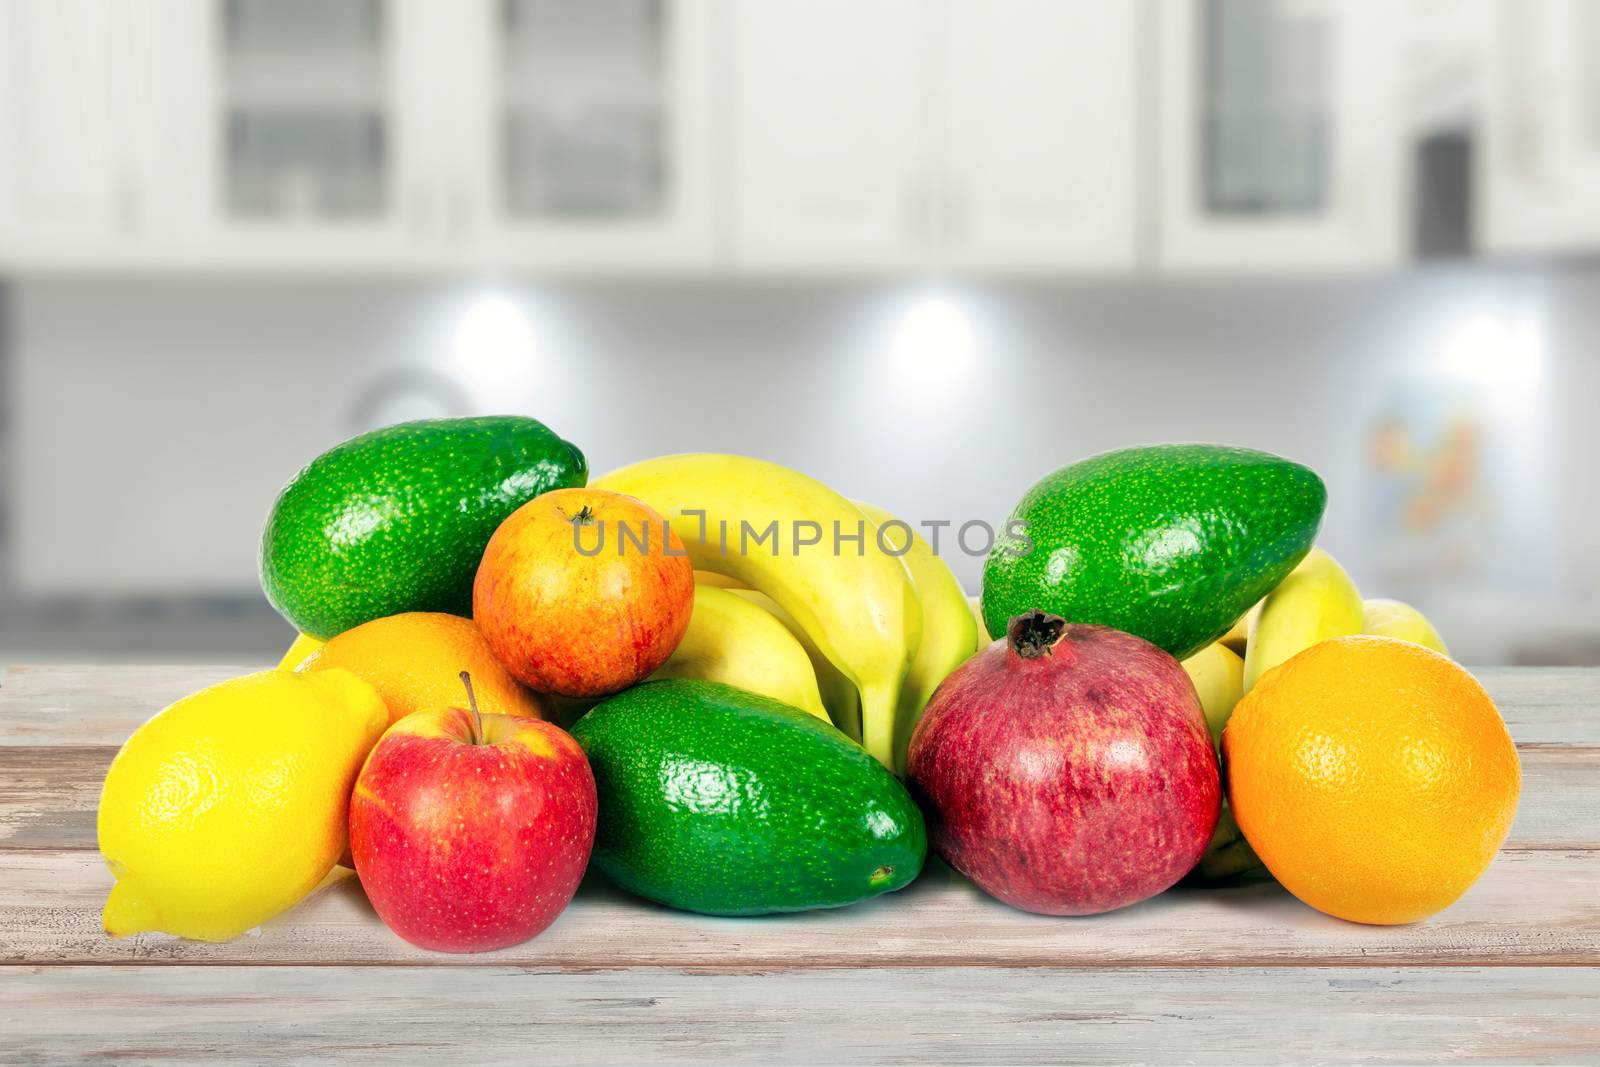 Healthy eating concept - group of various fruits on a wooden table in the kitchen in close-up